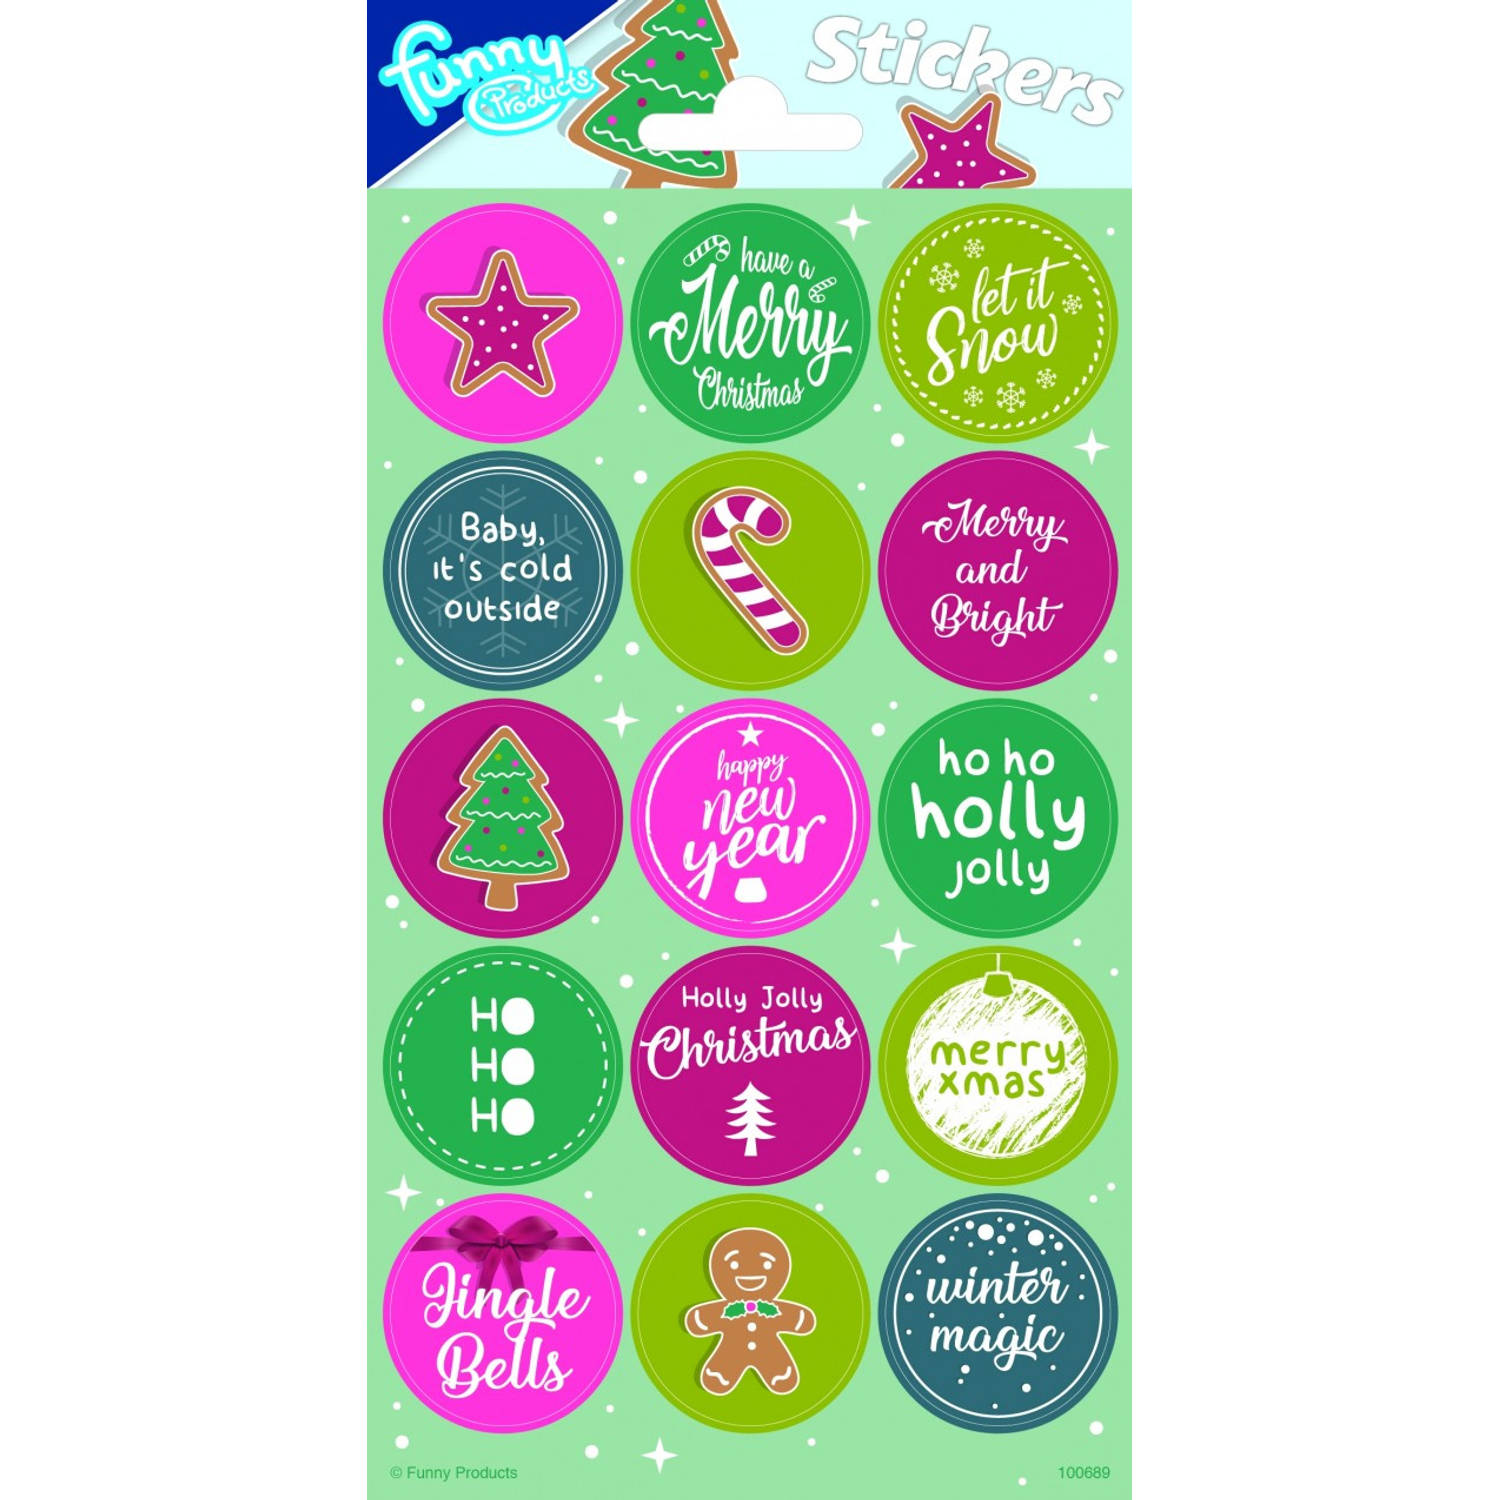 Funny Products Stickers Christmas 20 X 10 Cm Groen 15 Stuks